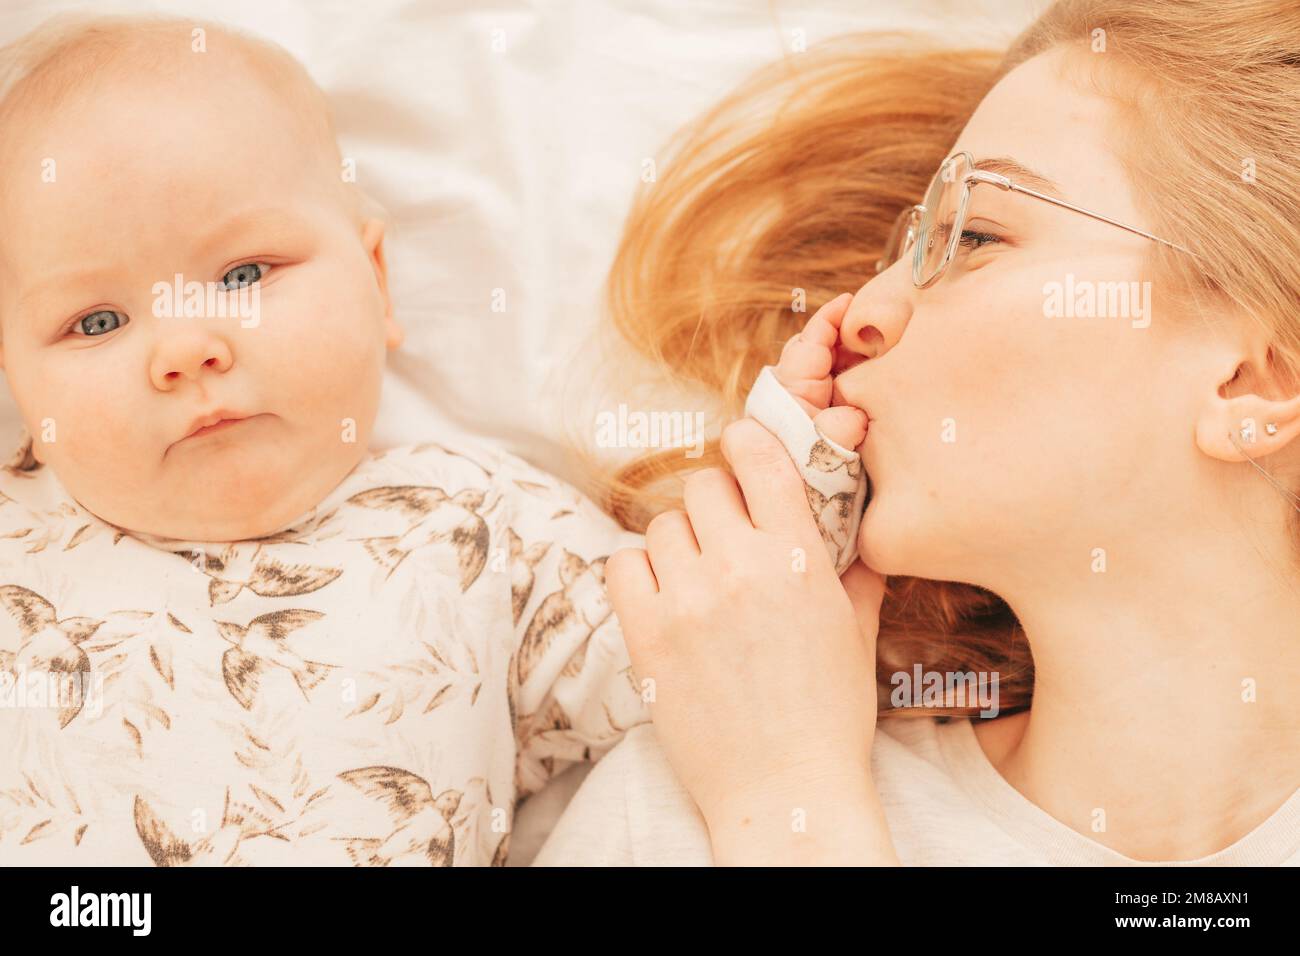 Cheerful young mother kiss fingers on palm of little baby lying on bed closeup. Home family photo of woman and cute infant child resting together Stock Photo